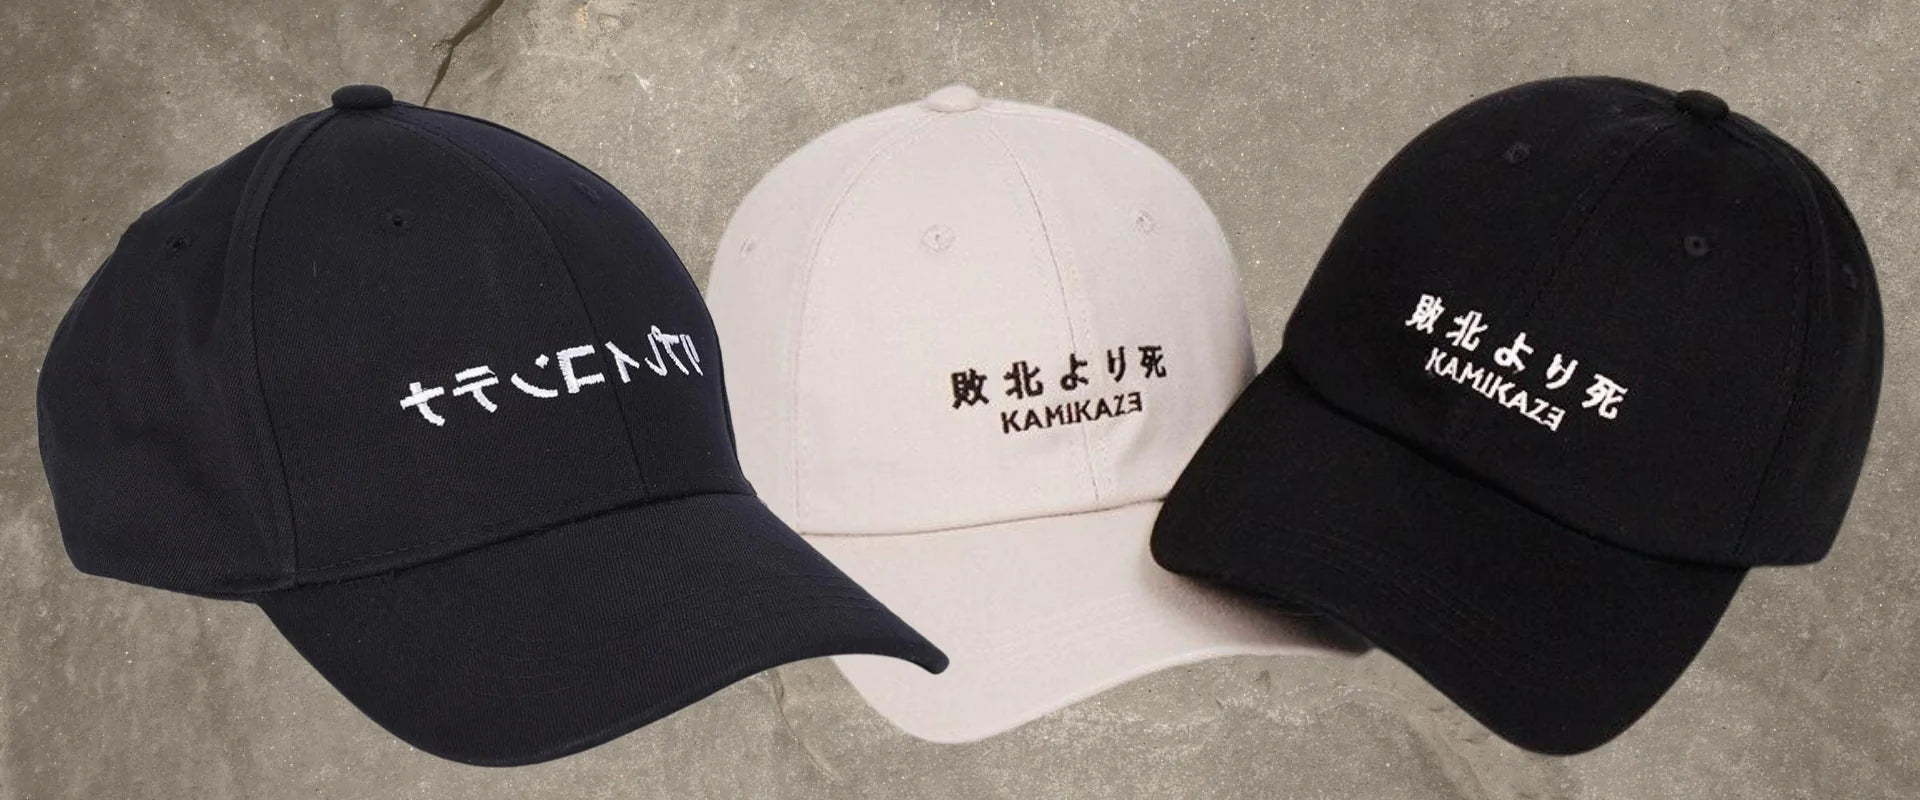 Japanese Hats & Caps | Japan-Clothing – Page 3